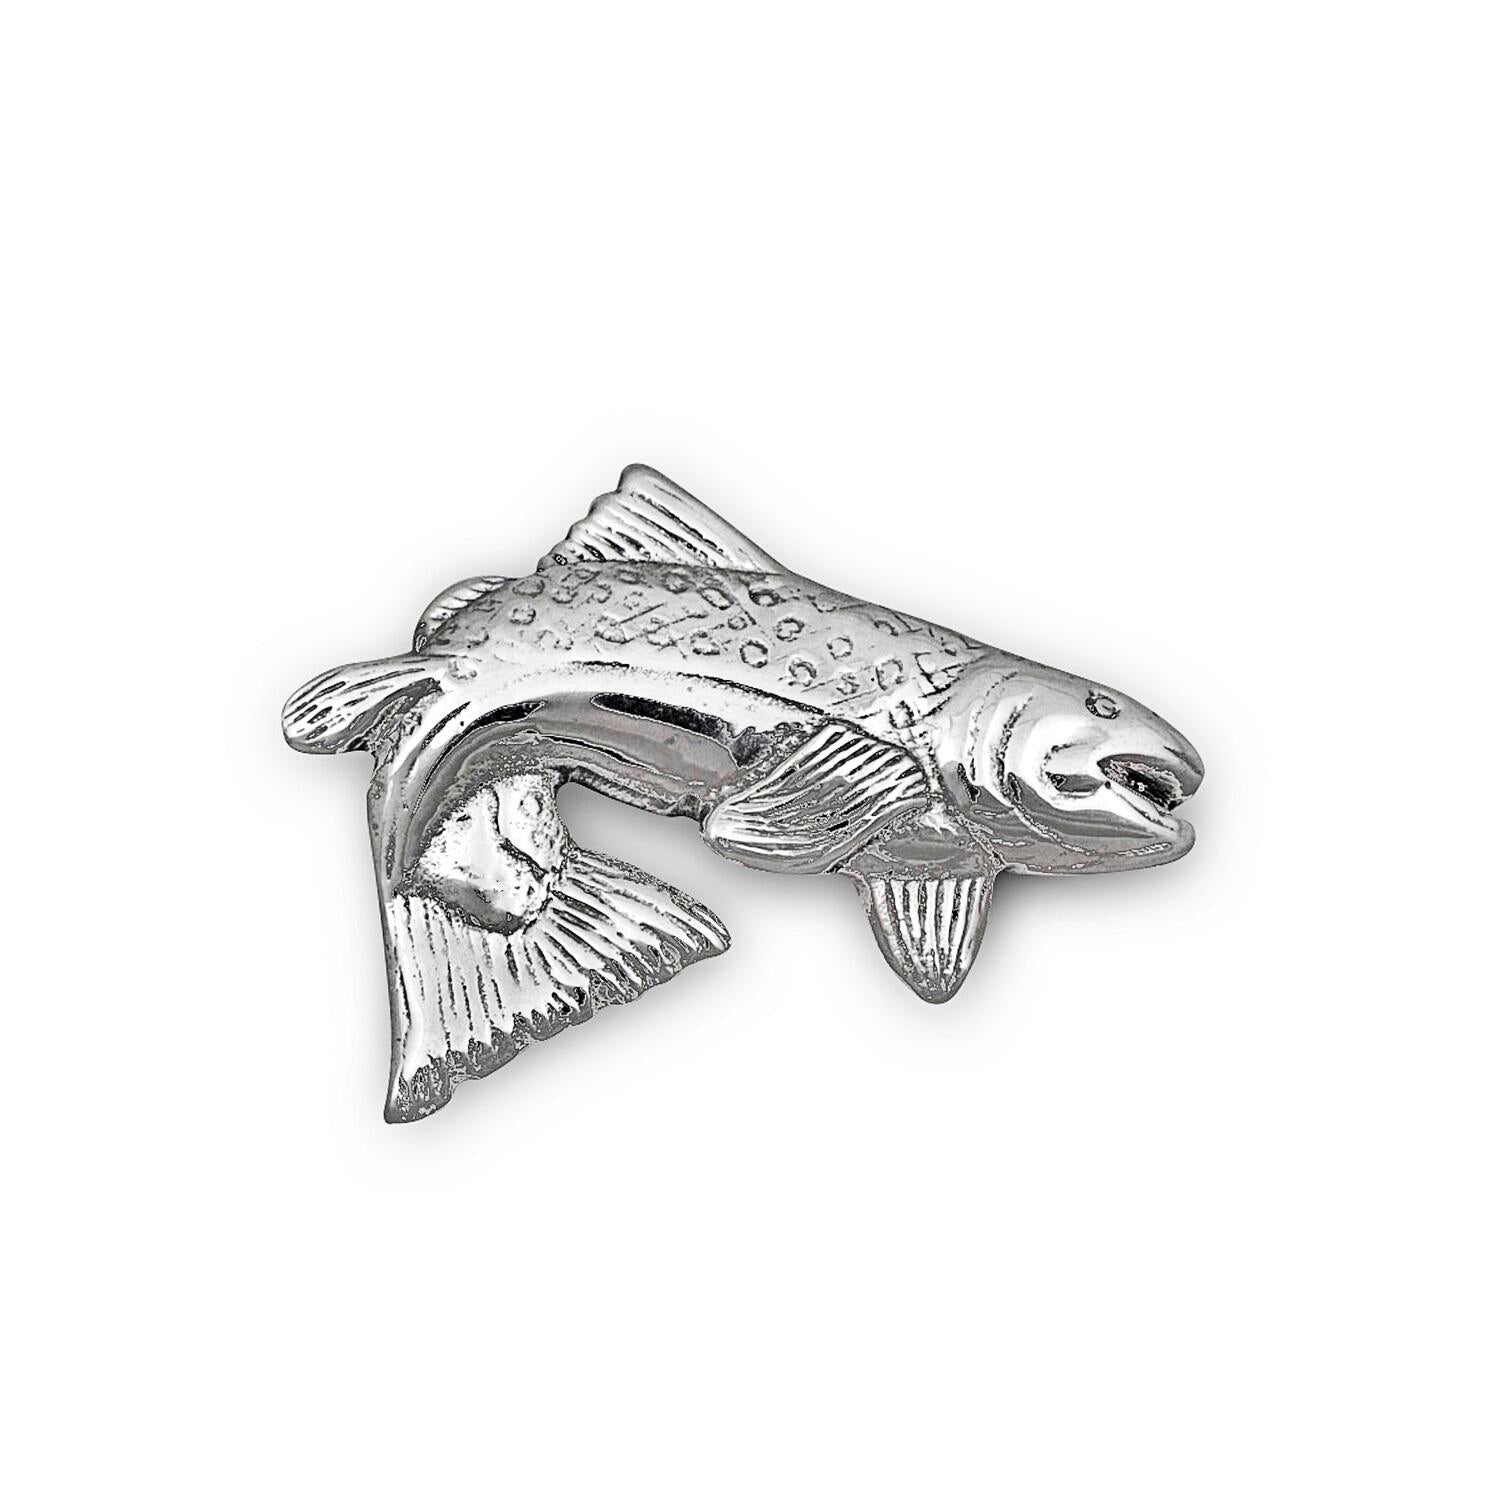 GIFTABLES Ocean Salmon Weight